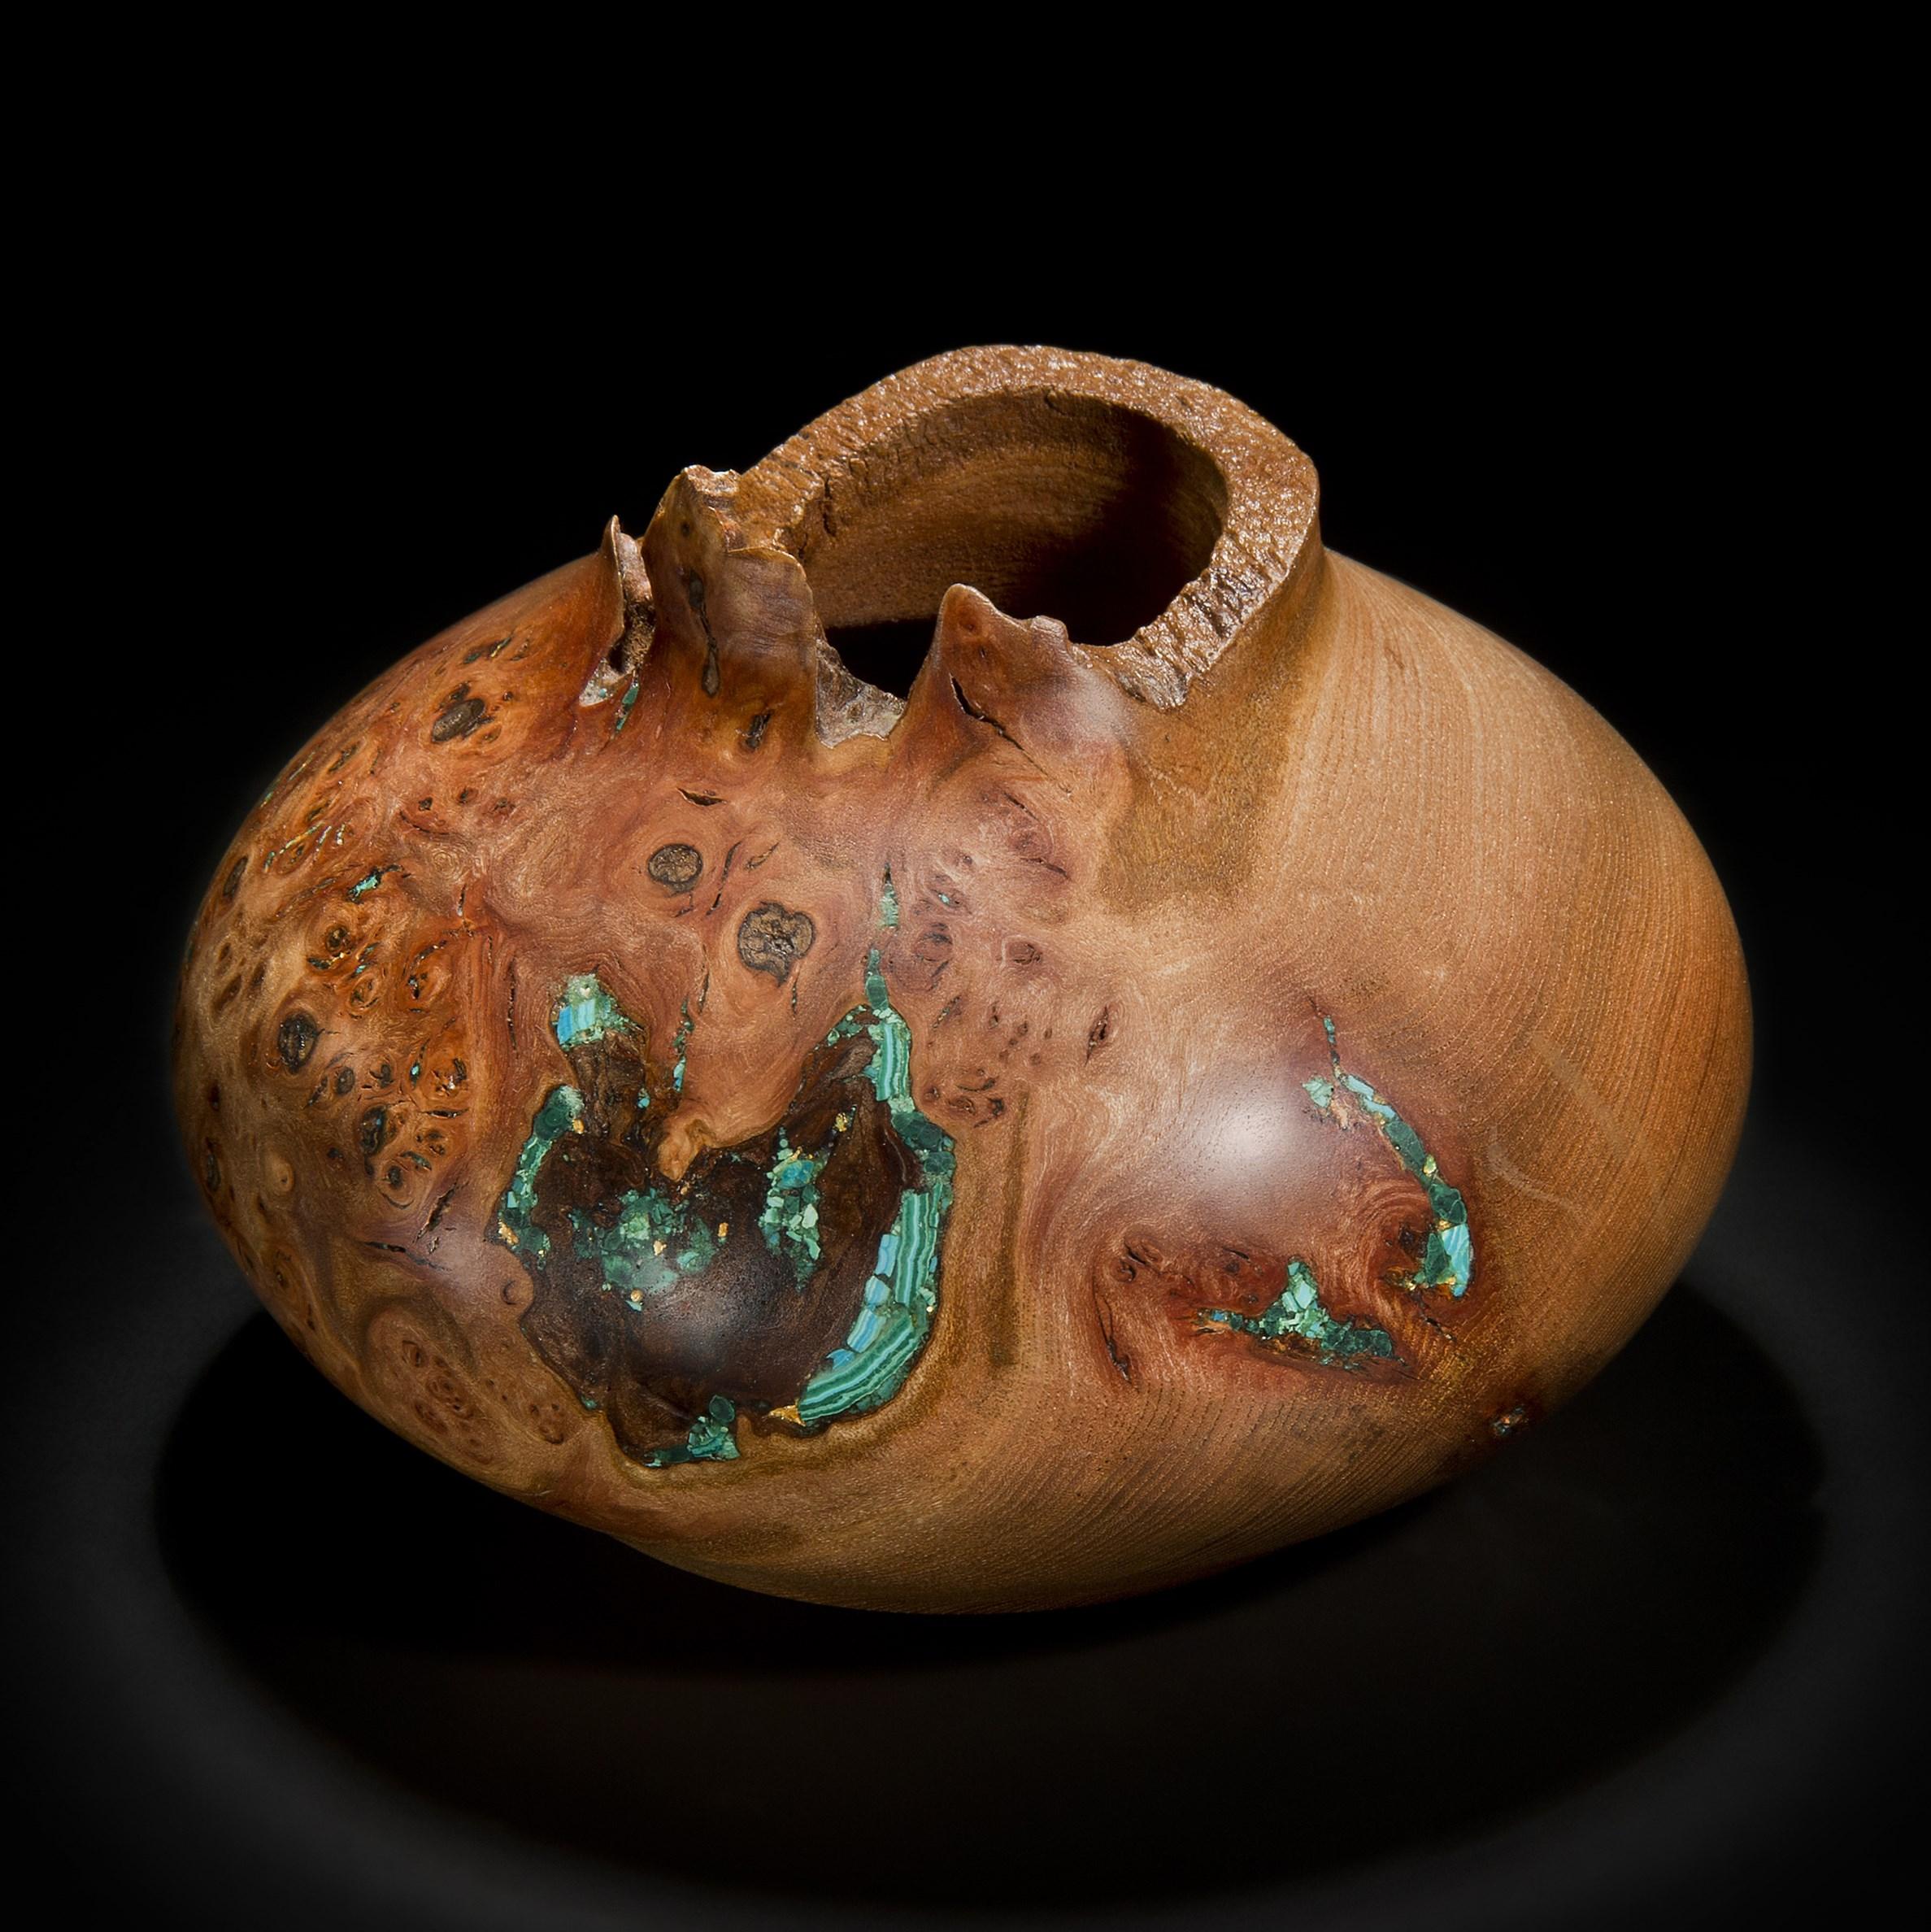 ‘Earthly Treasures No 28’ is a unique sculptural bowl by the British artist, Morrison Thomas. It is made from burred English Elm inlaid with Chrysocolla, Malachite, Gold and Turquoise.

Morrison turns beautiful wooden spheres from damaged or